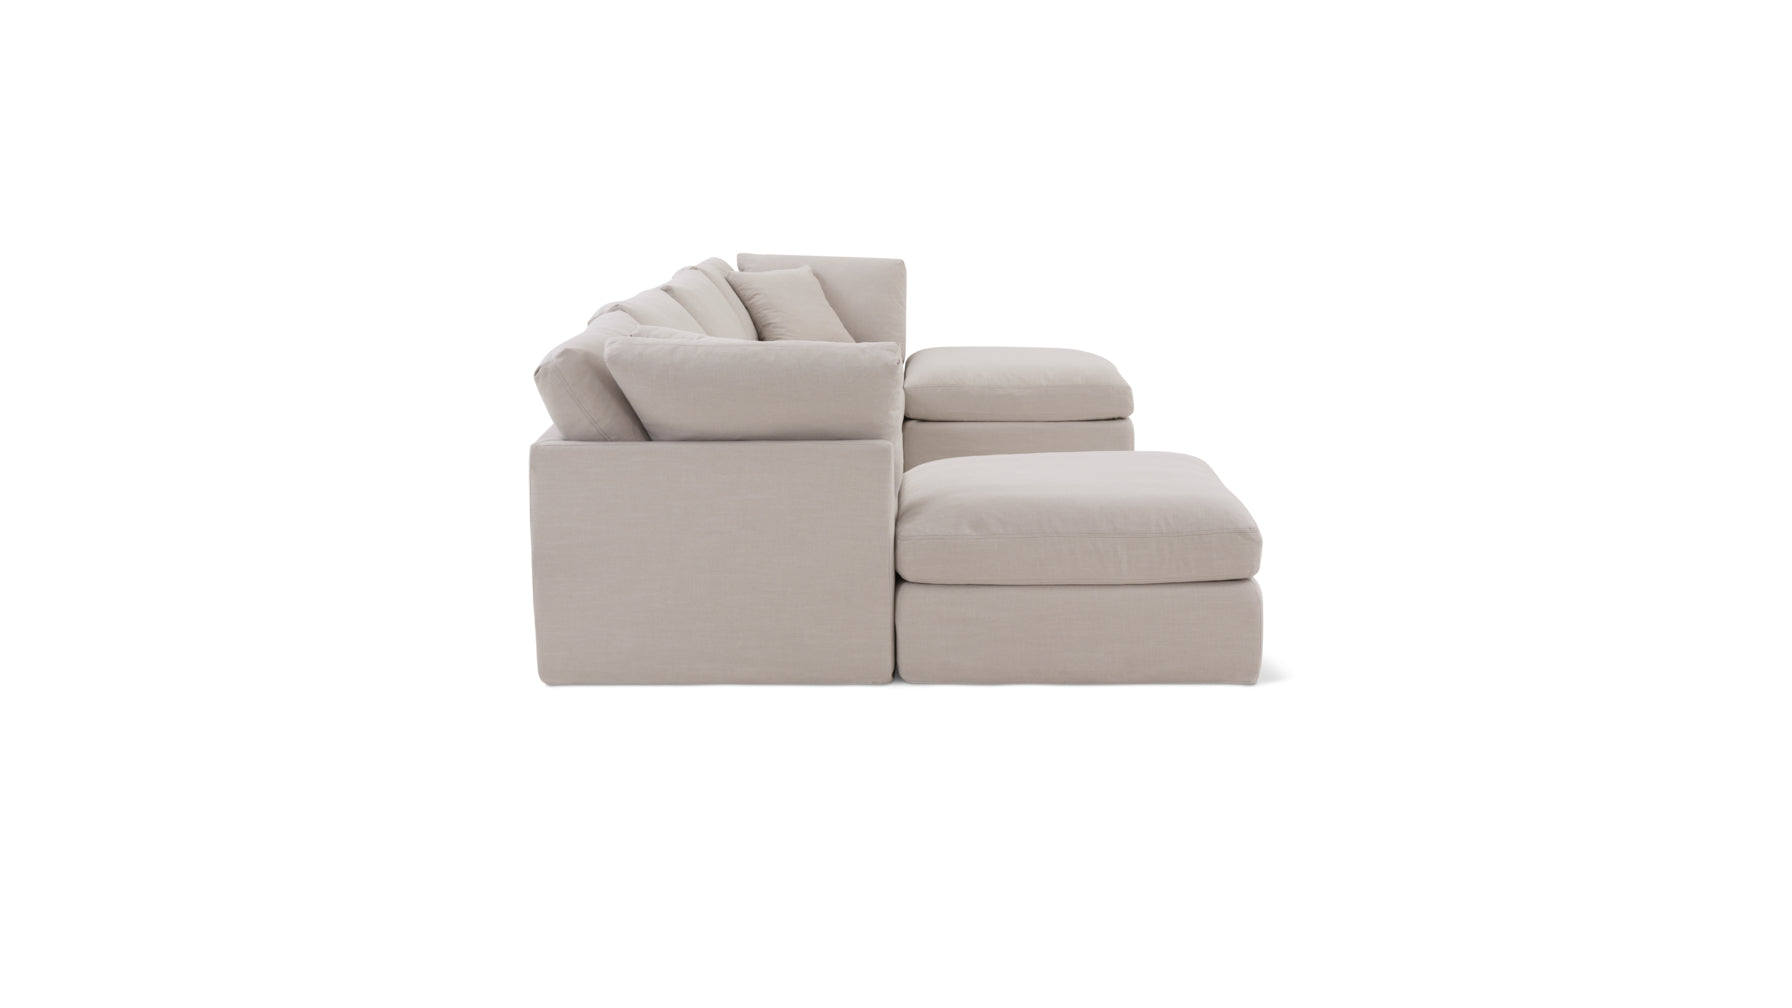 Get Together™ 6-Piece Modular U-Shaped Sectional, Standard, Clay - Image 6